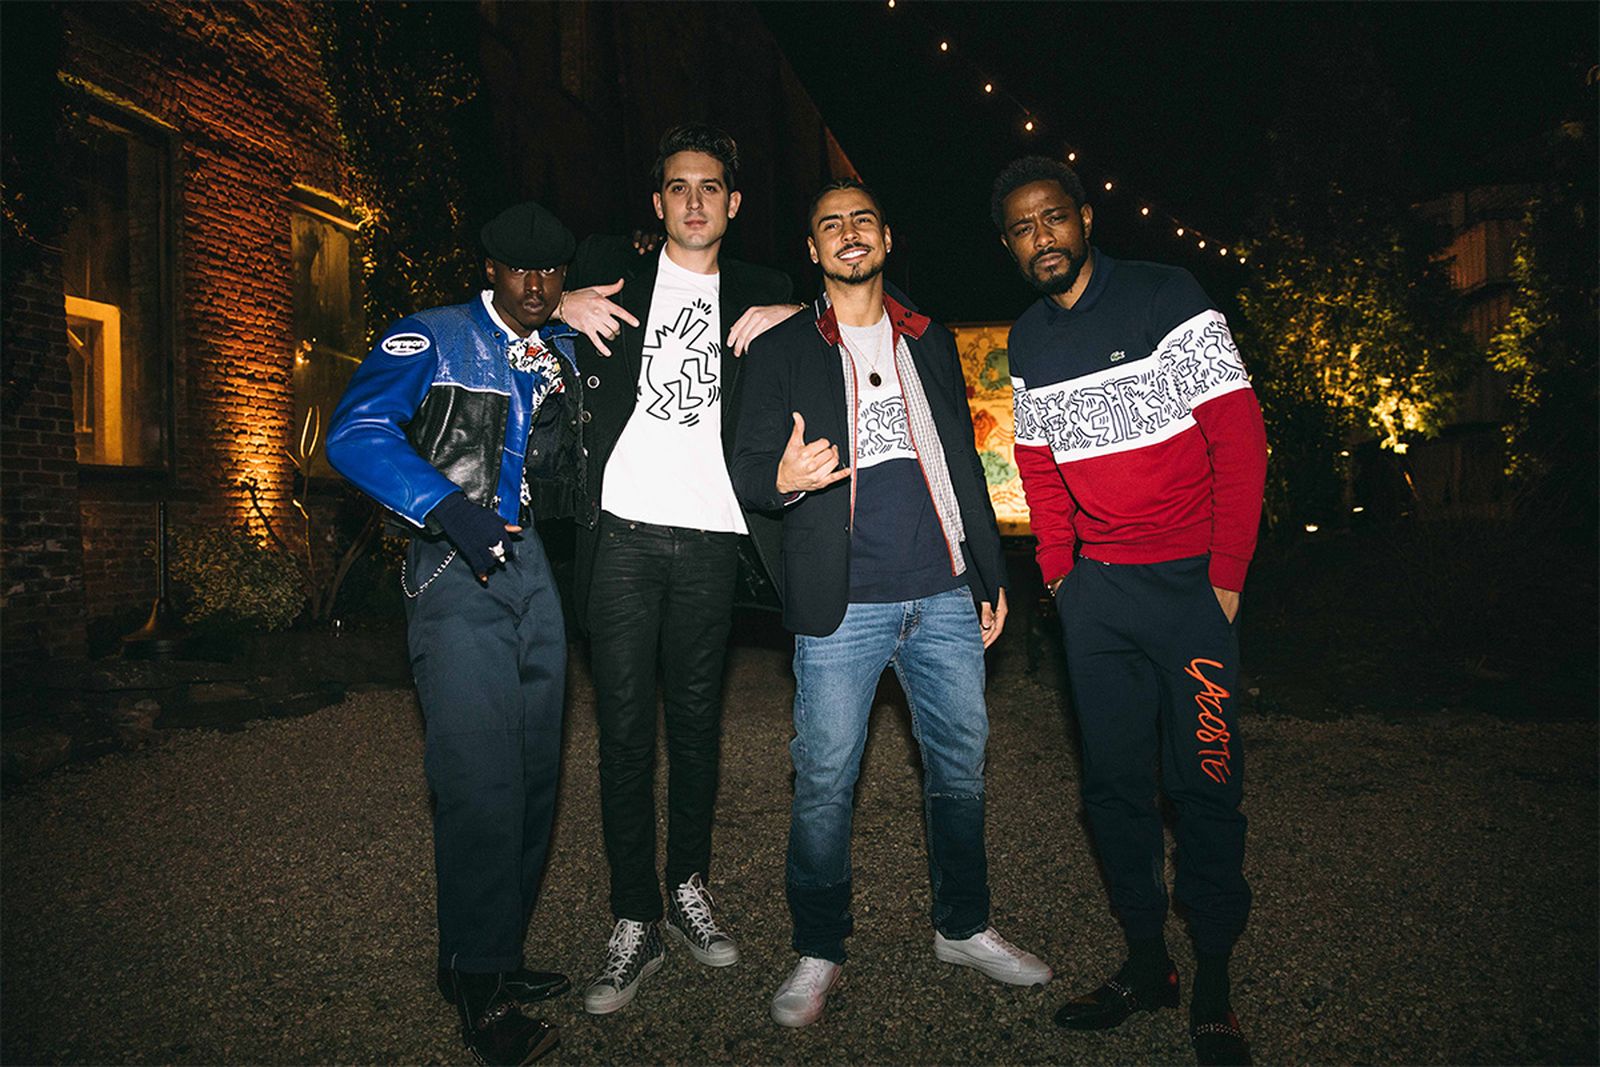 Turbine Vurdering inkompetence Here's What Went Down at the Lacoste x Keith Haring NYC Party